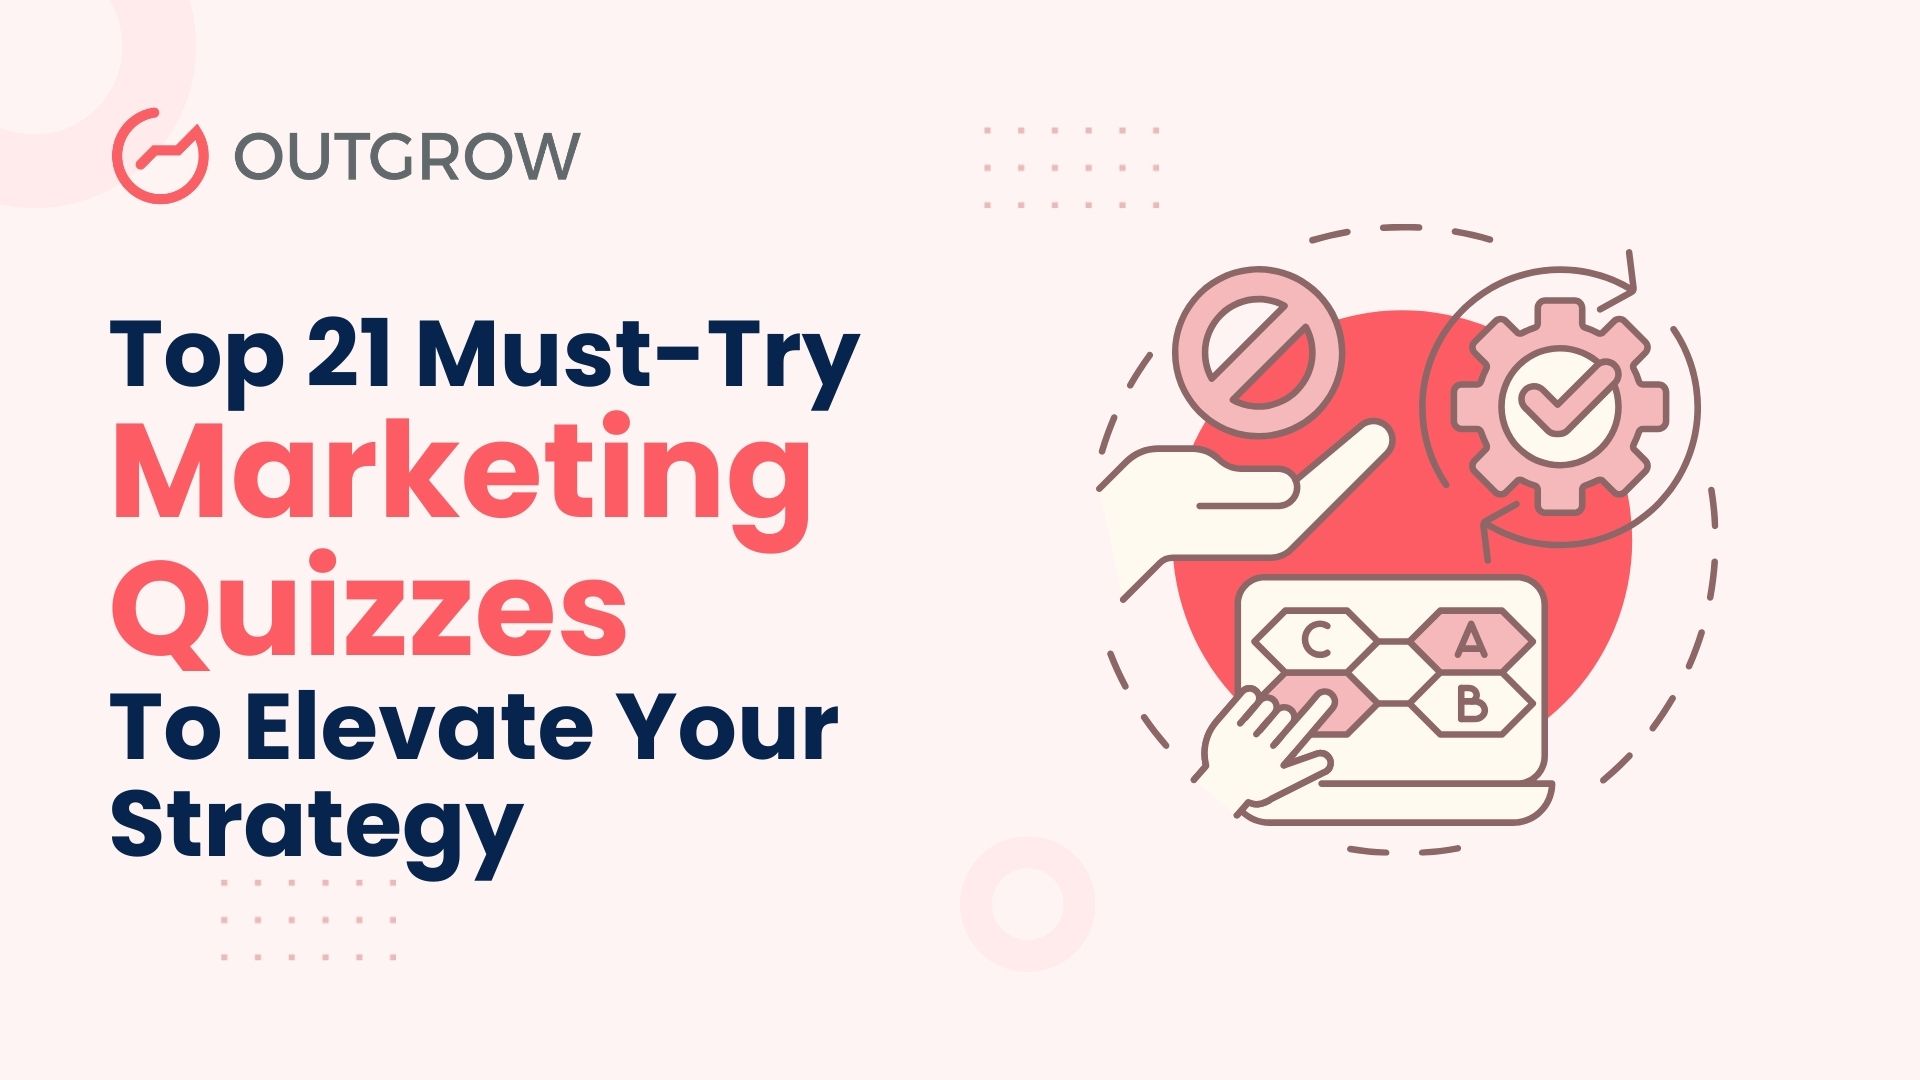 Top 21 Must-Try Marketing Quizzes to Elevate Your Strategy